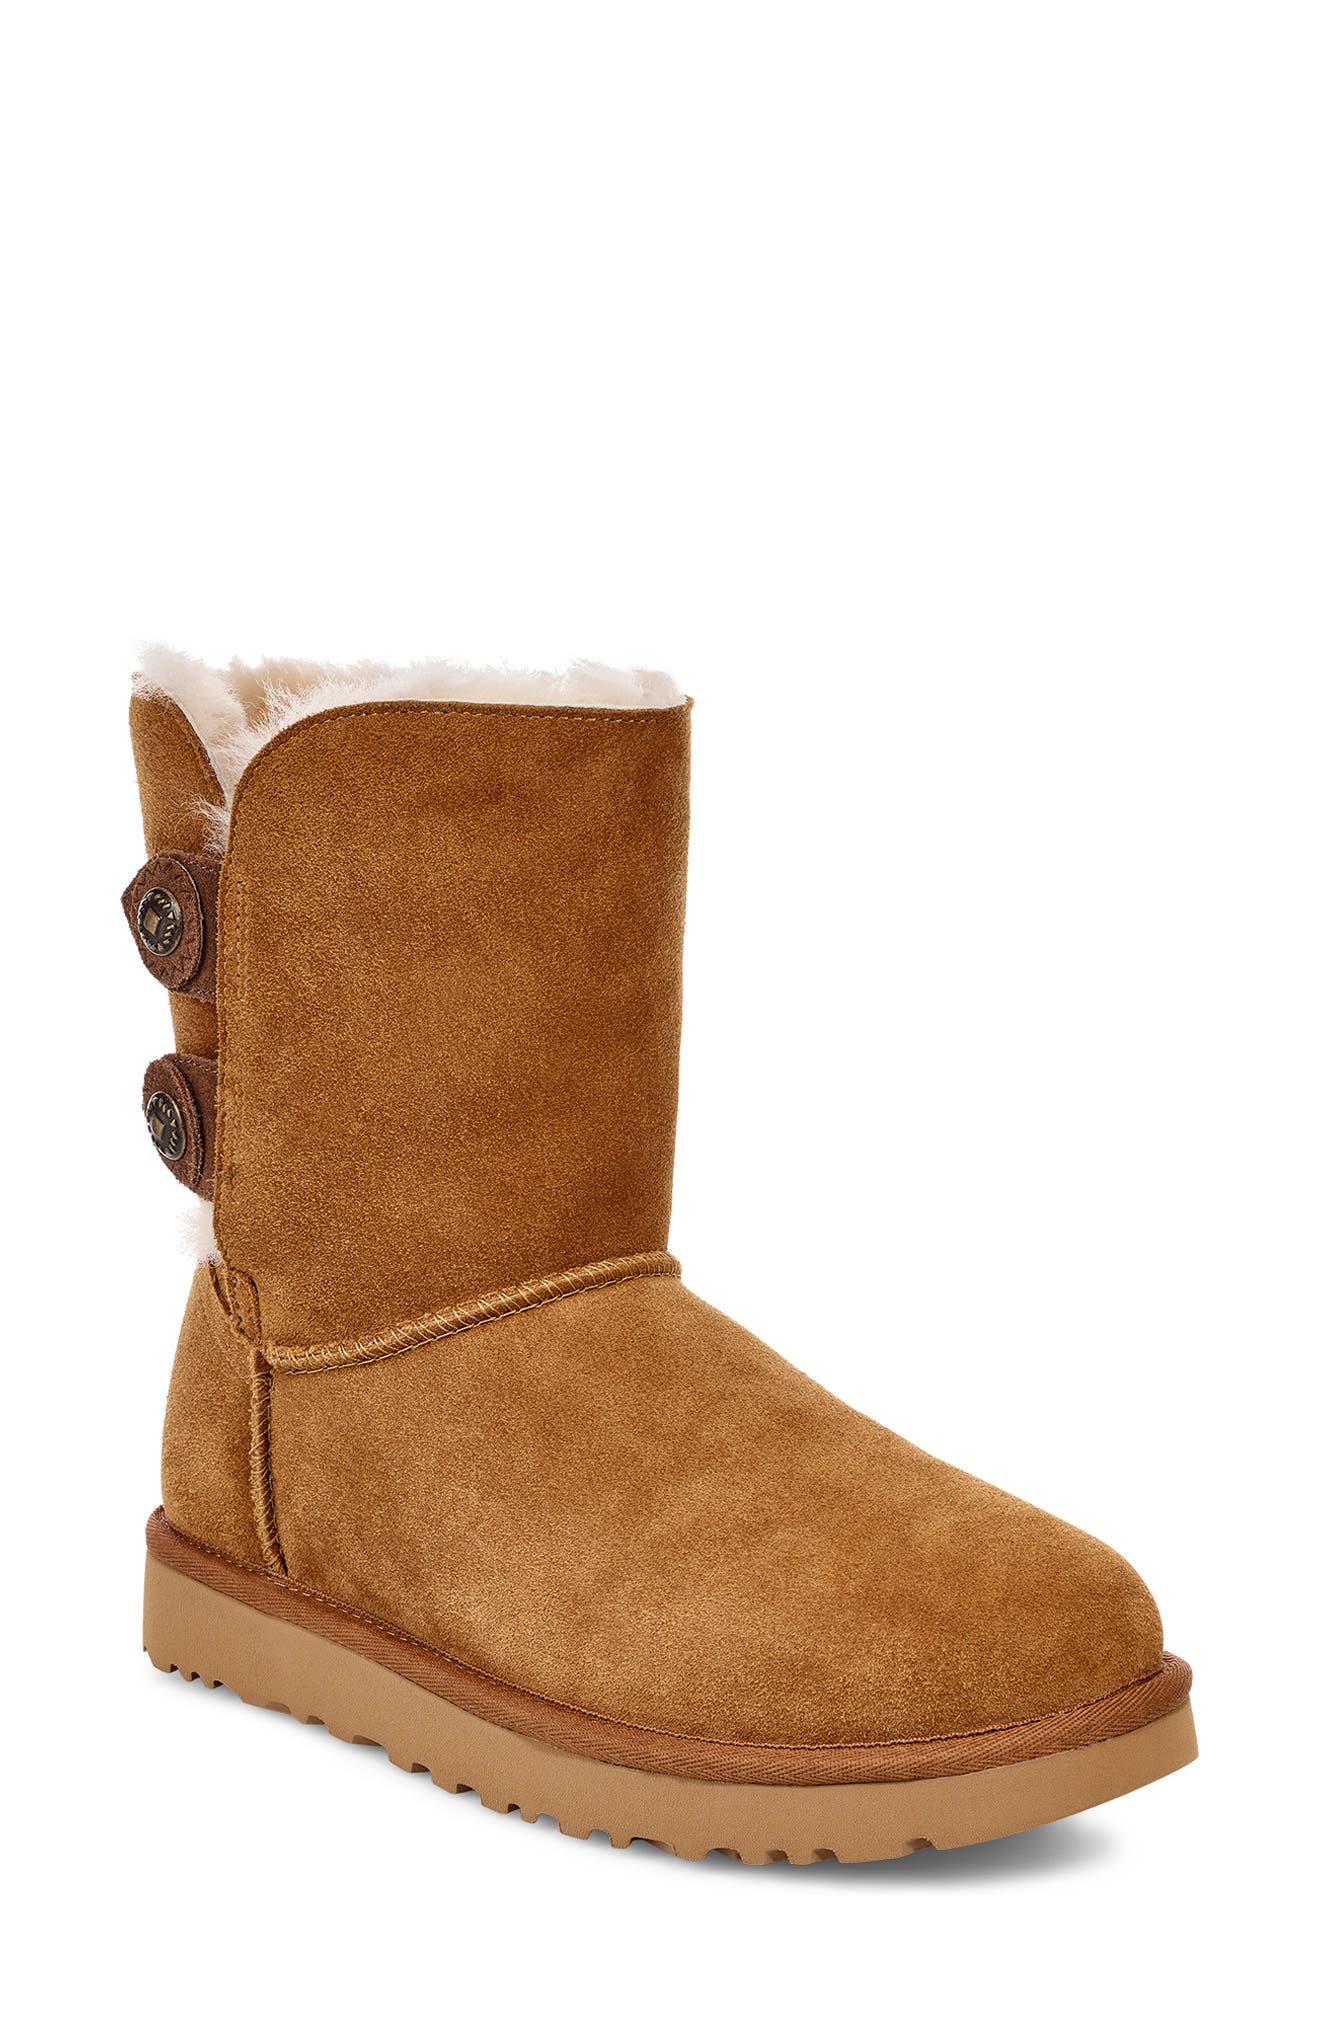 nordstrom womens ugg boots